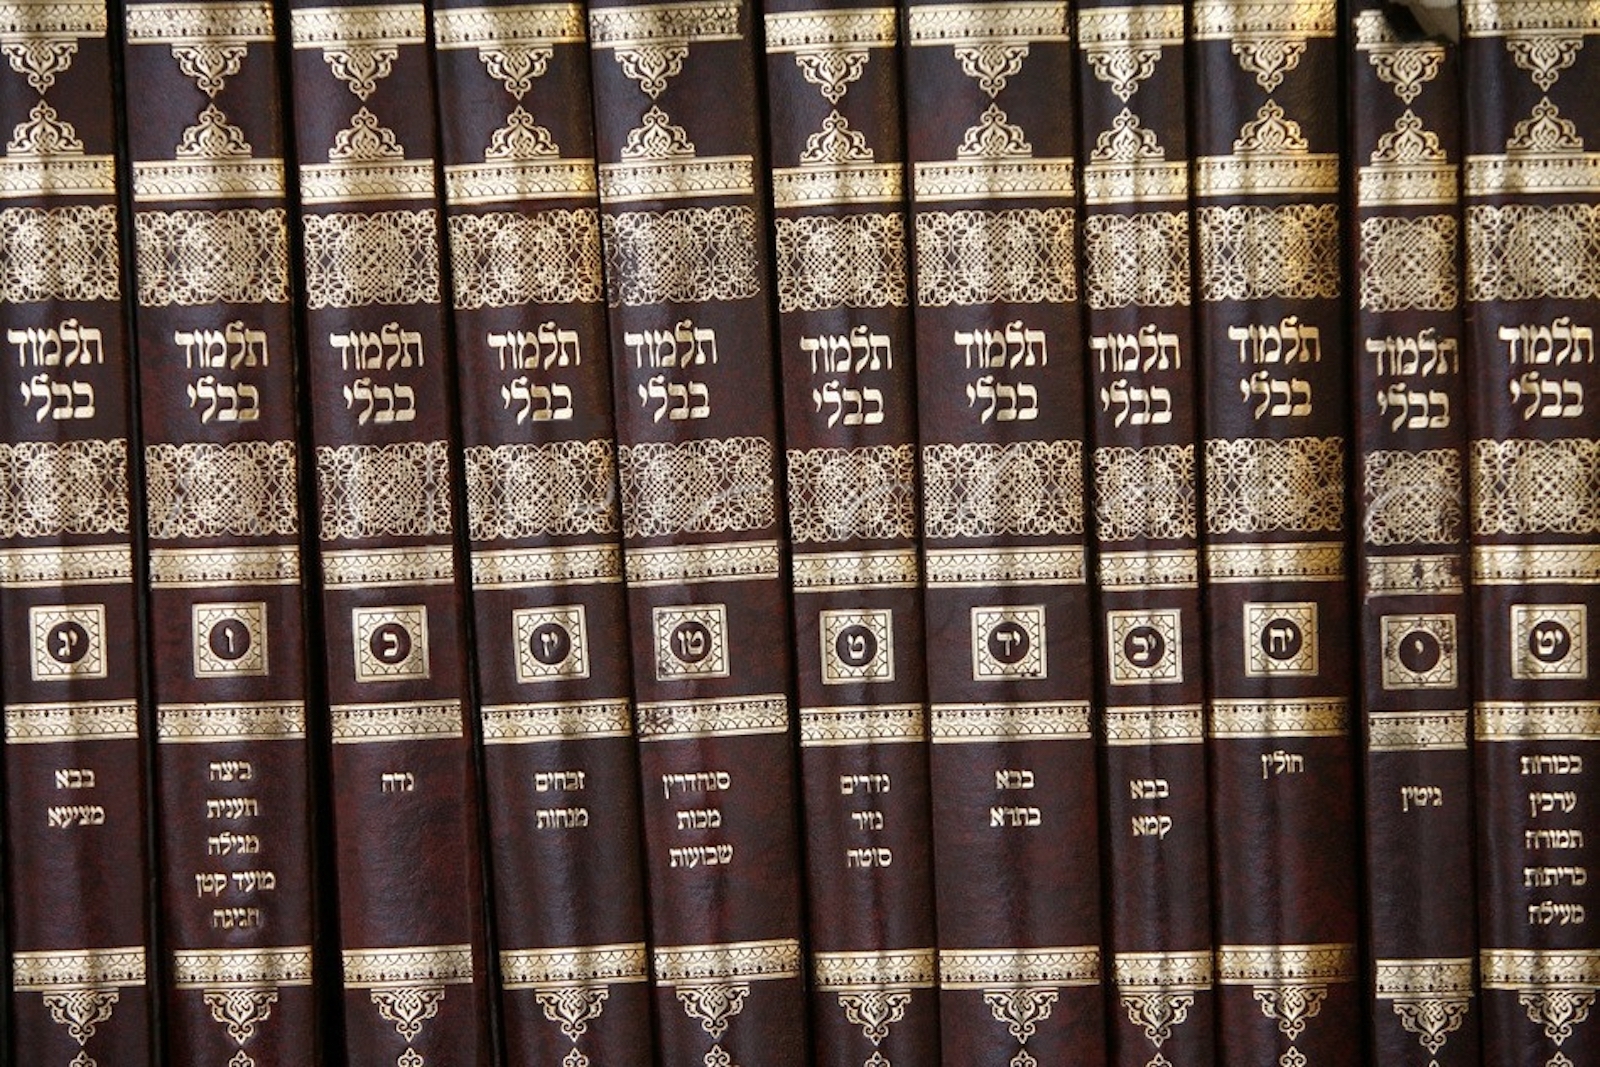 How to Read the Talmud | My Jewish Learning